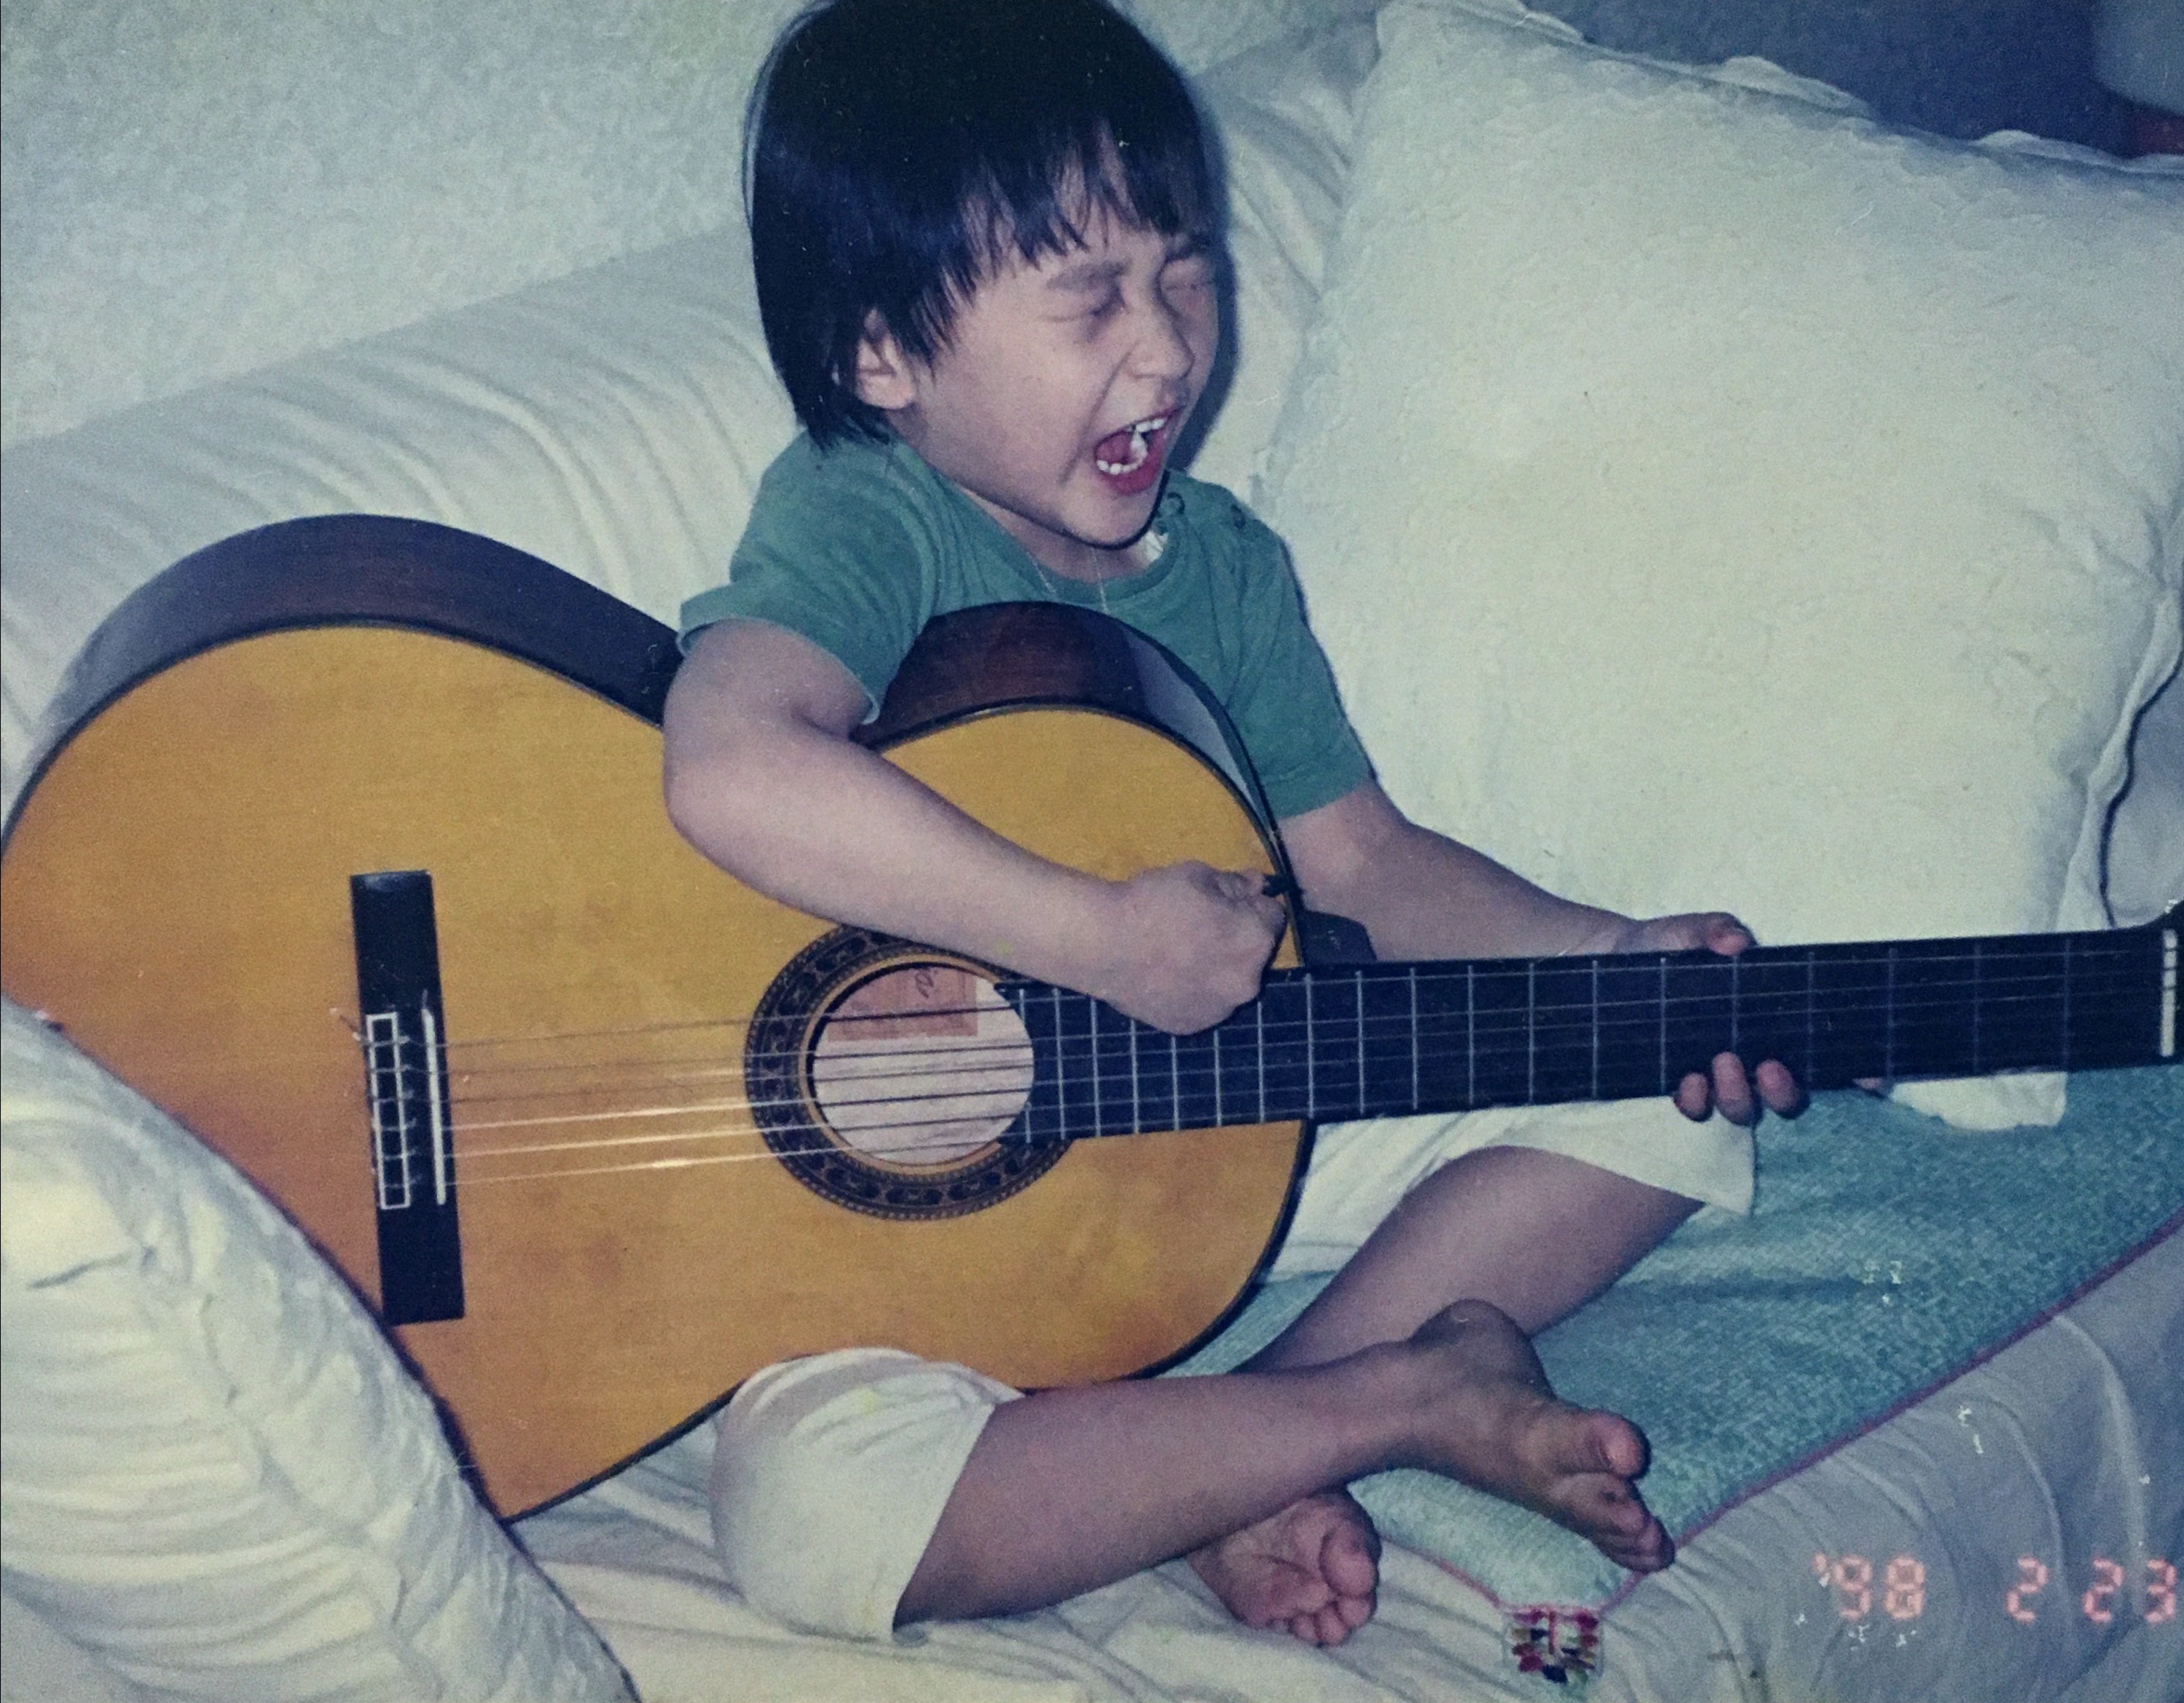 My cute babe. She’s playing guitar.  This photo was taken 17years ago. 